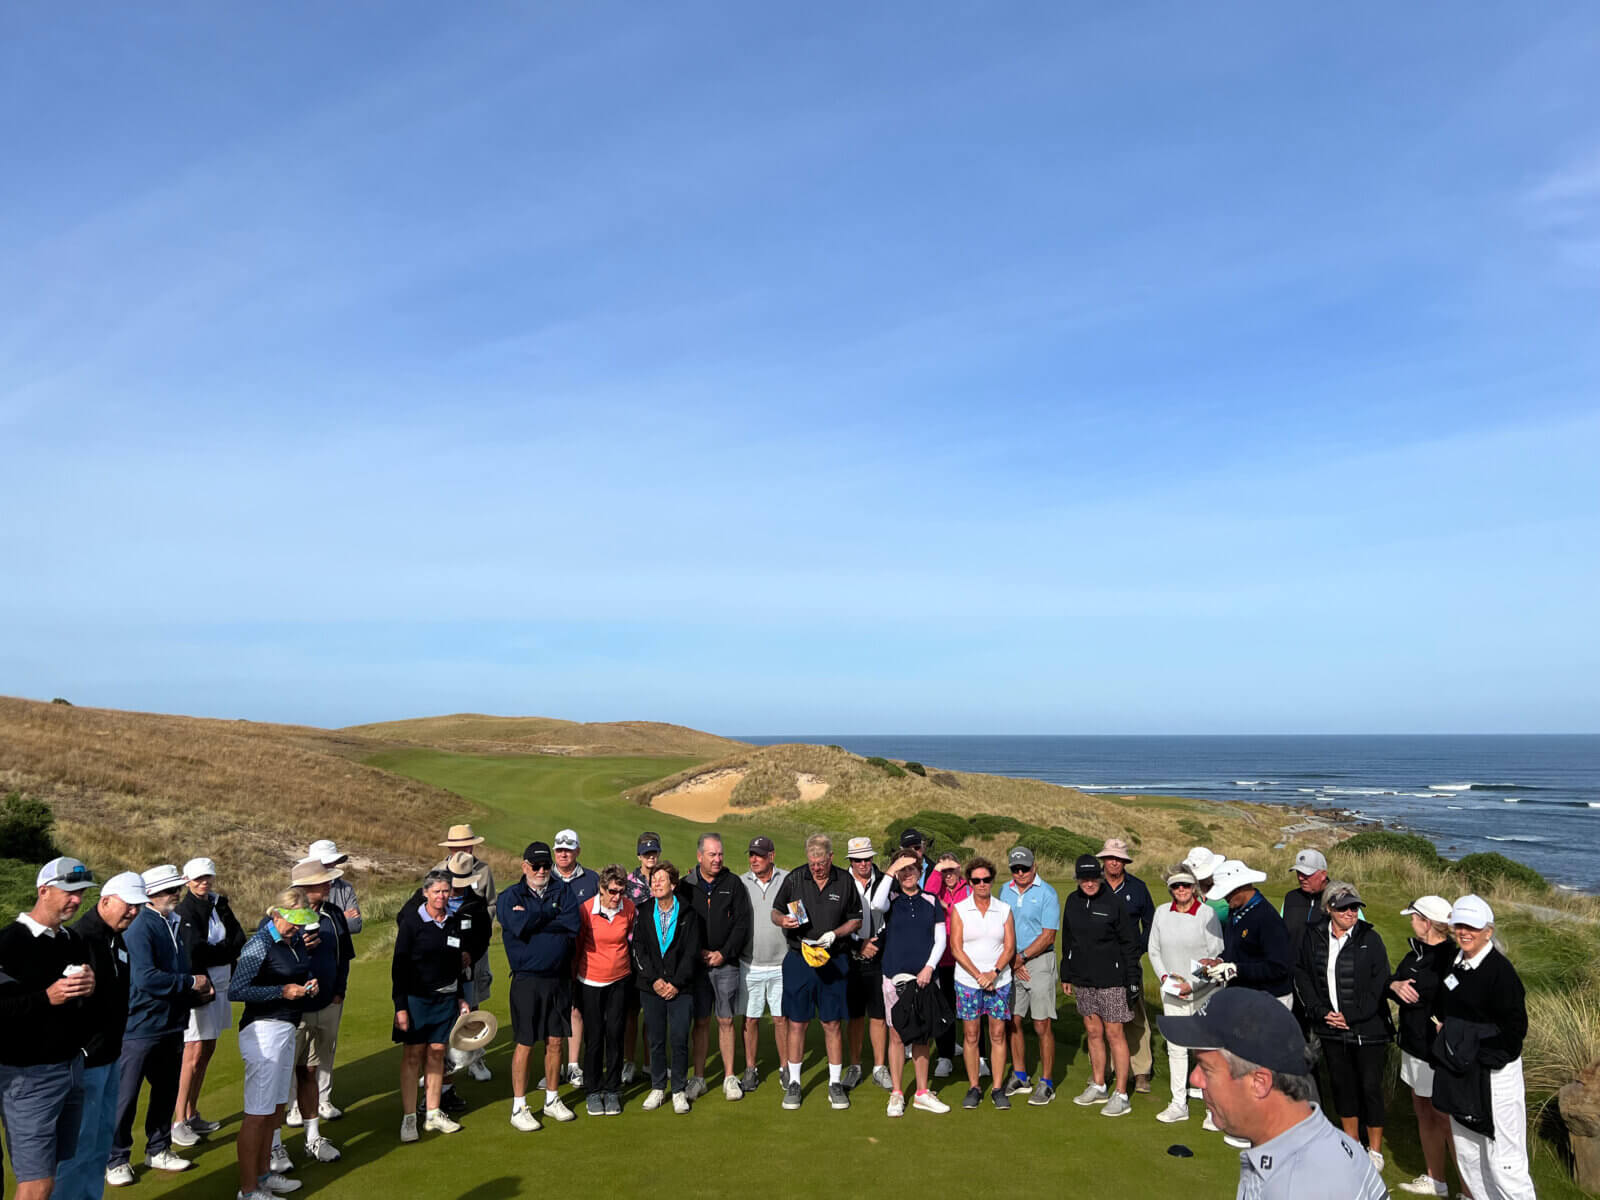 Group at Ocean Dunes Golf Course